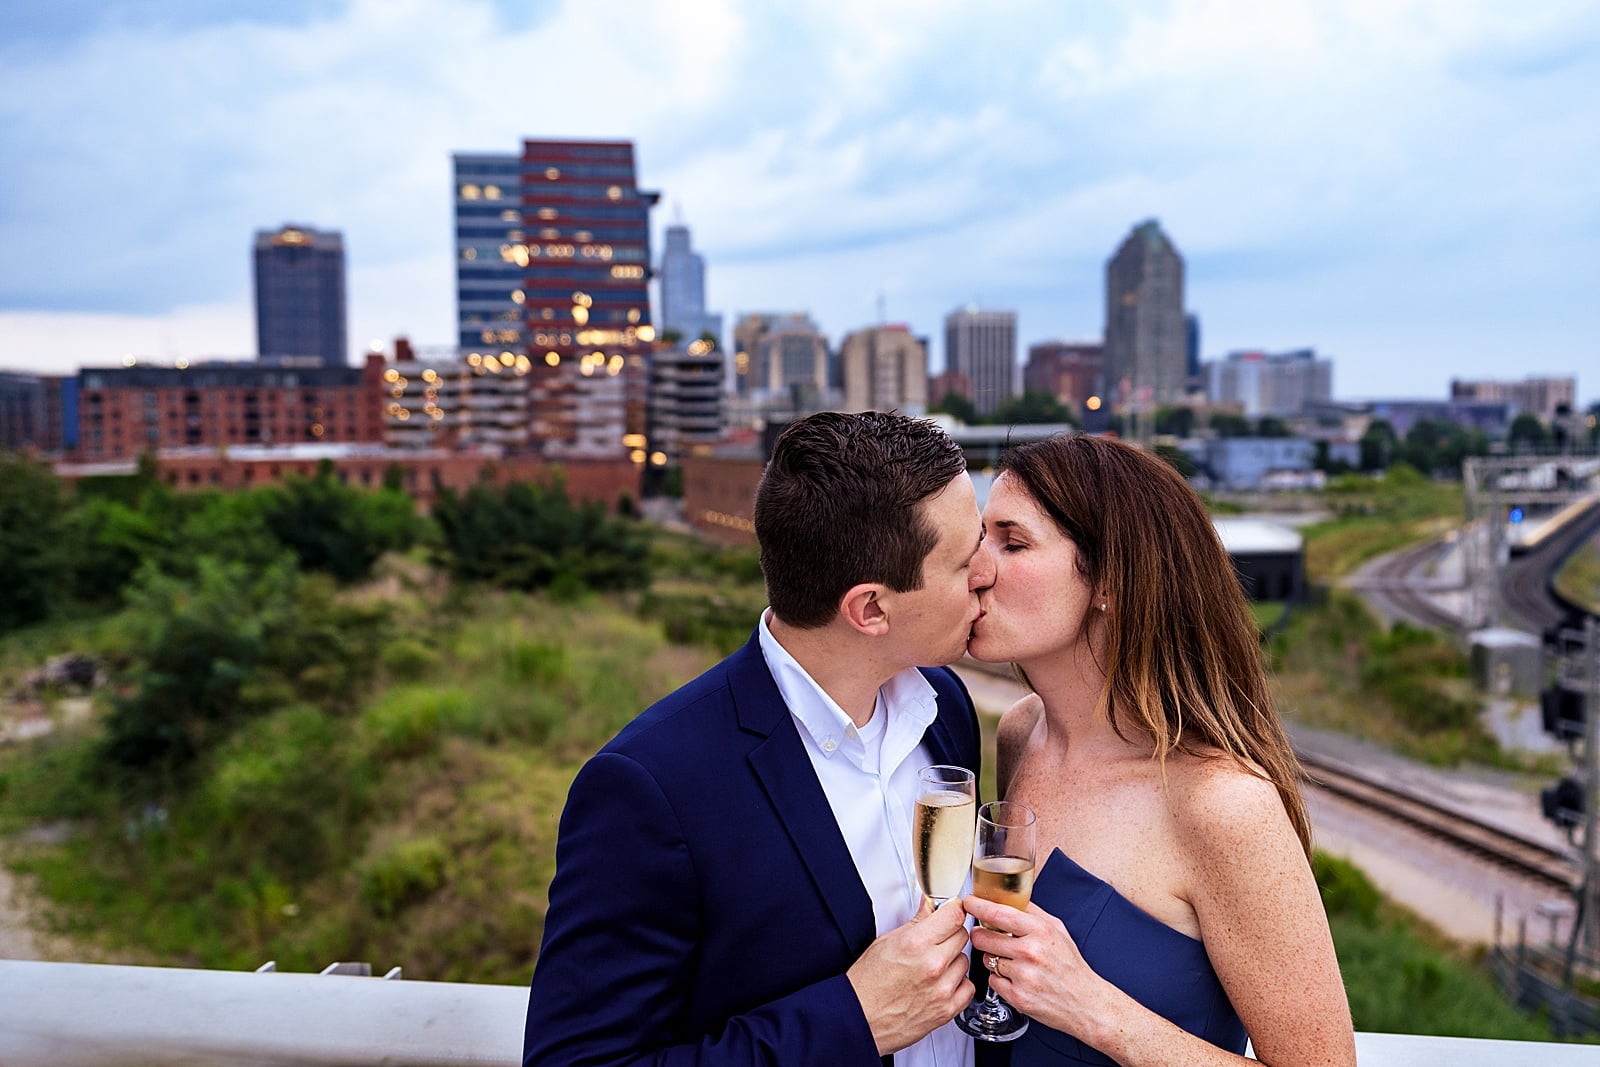 Raleigh engagement photographer says make sure you get a shot with the Raleigh skyline at your engagement session